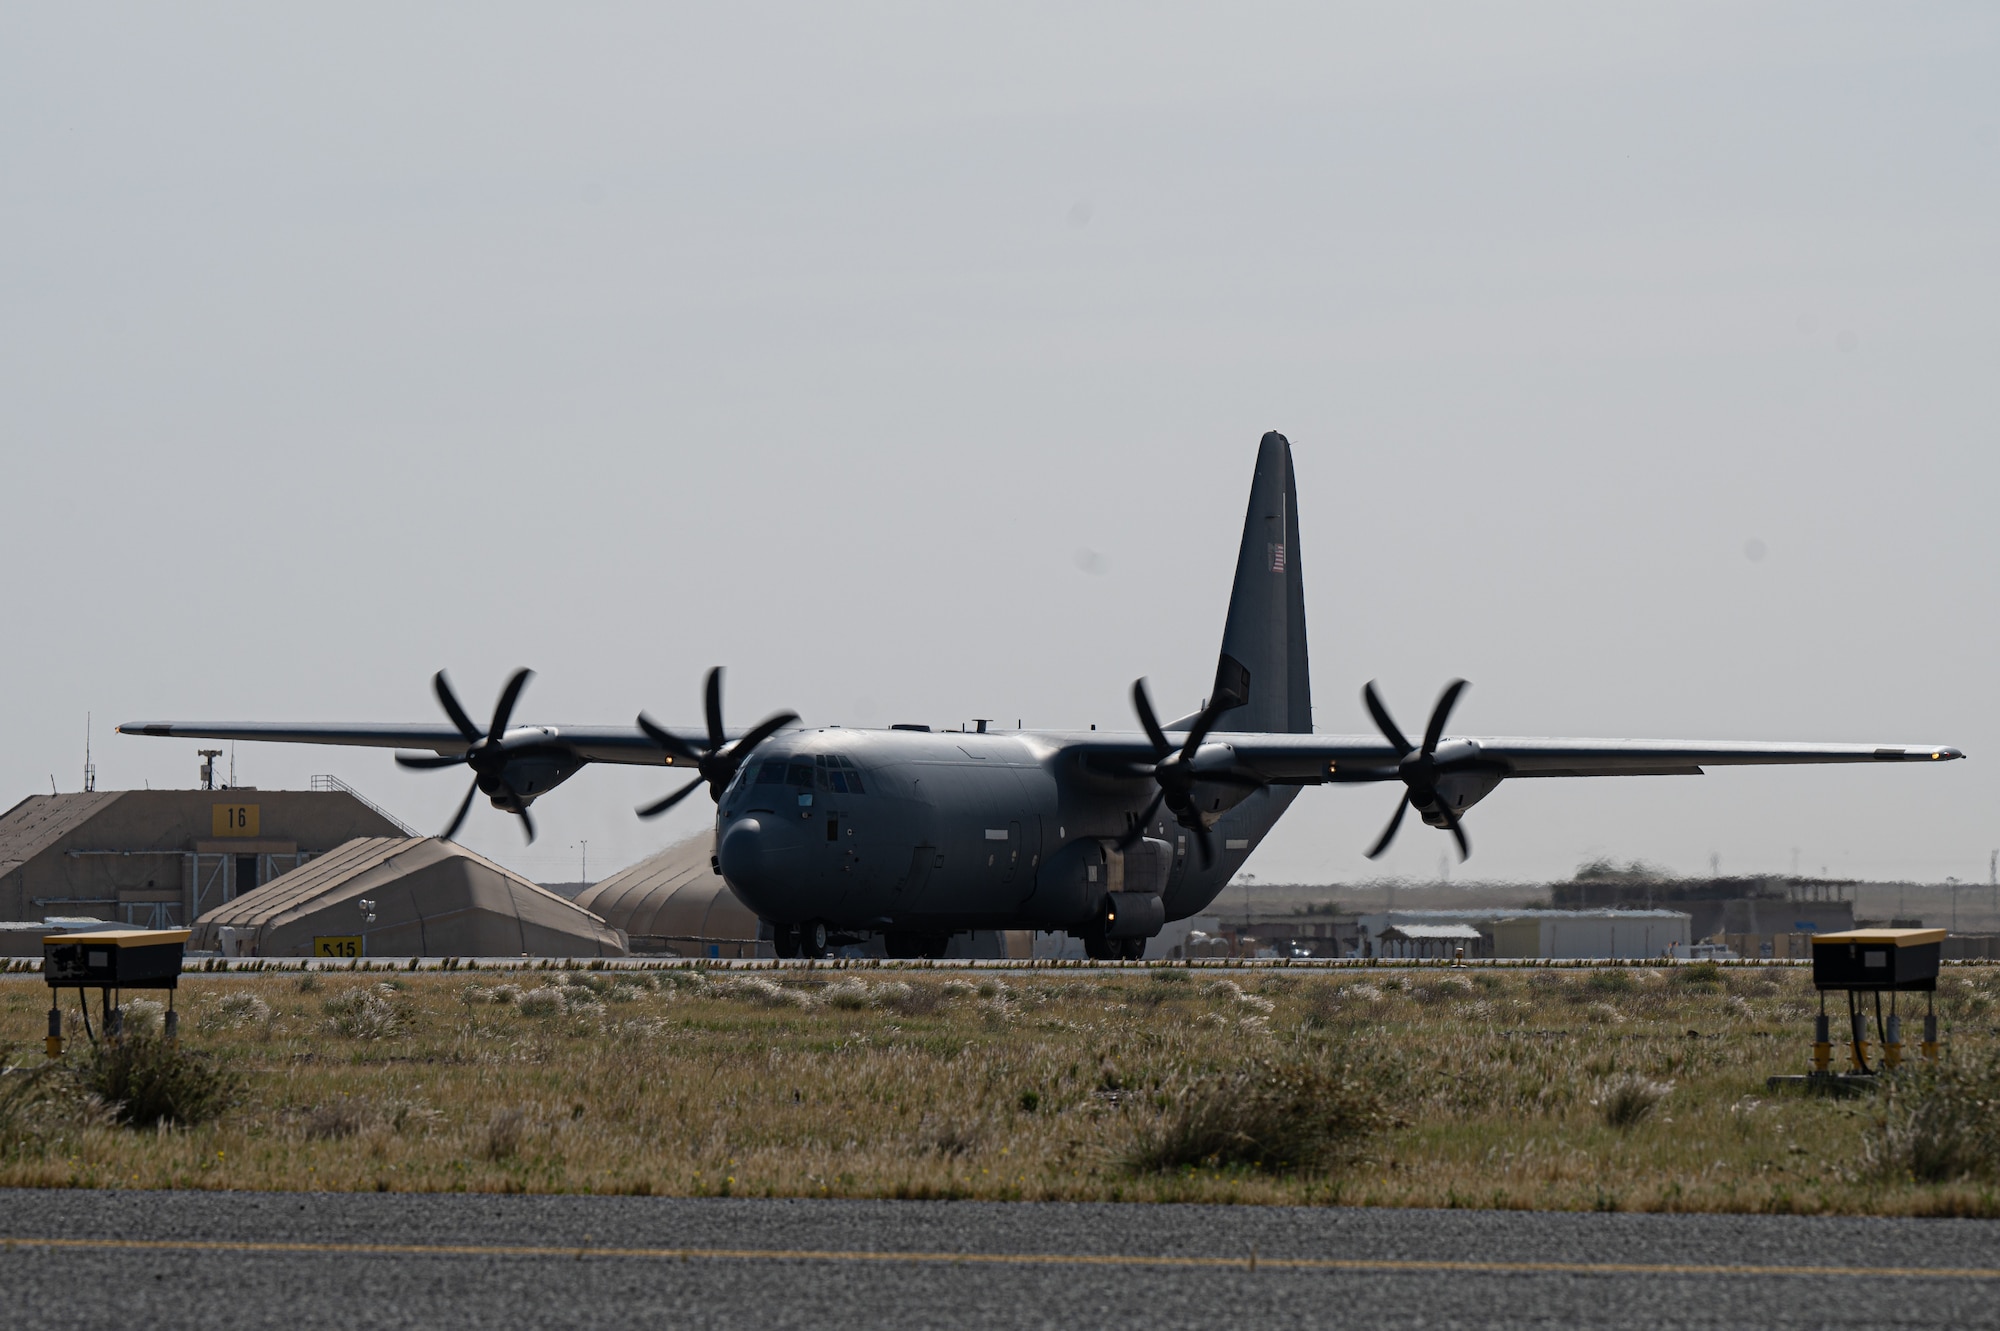 A C-130 aircraft loaded with humanitarian aid bound for airdrop over Gaza taxis for takeoff.